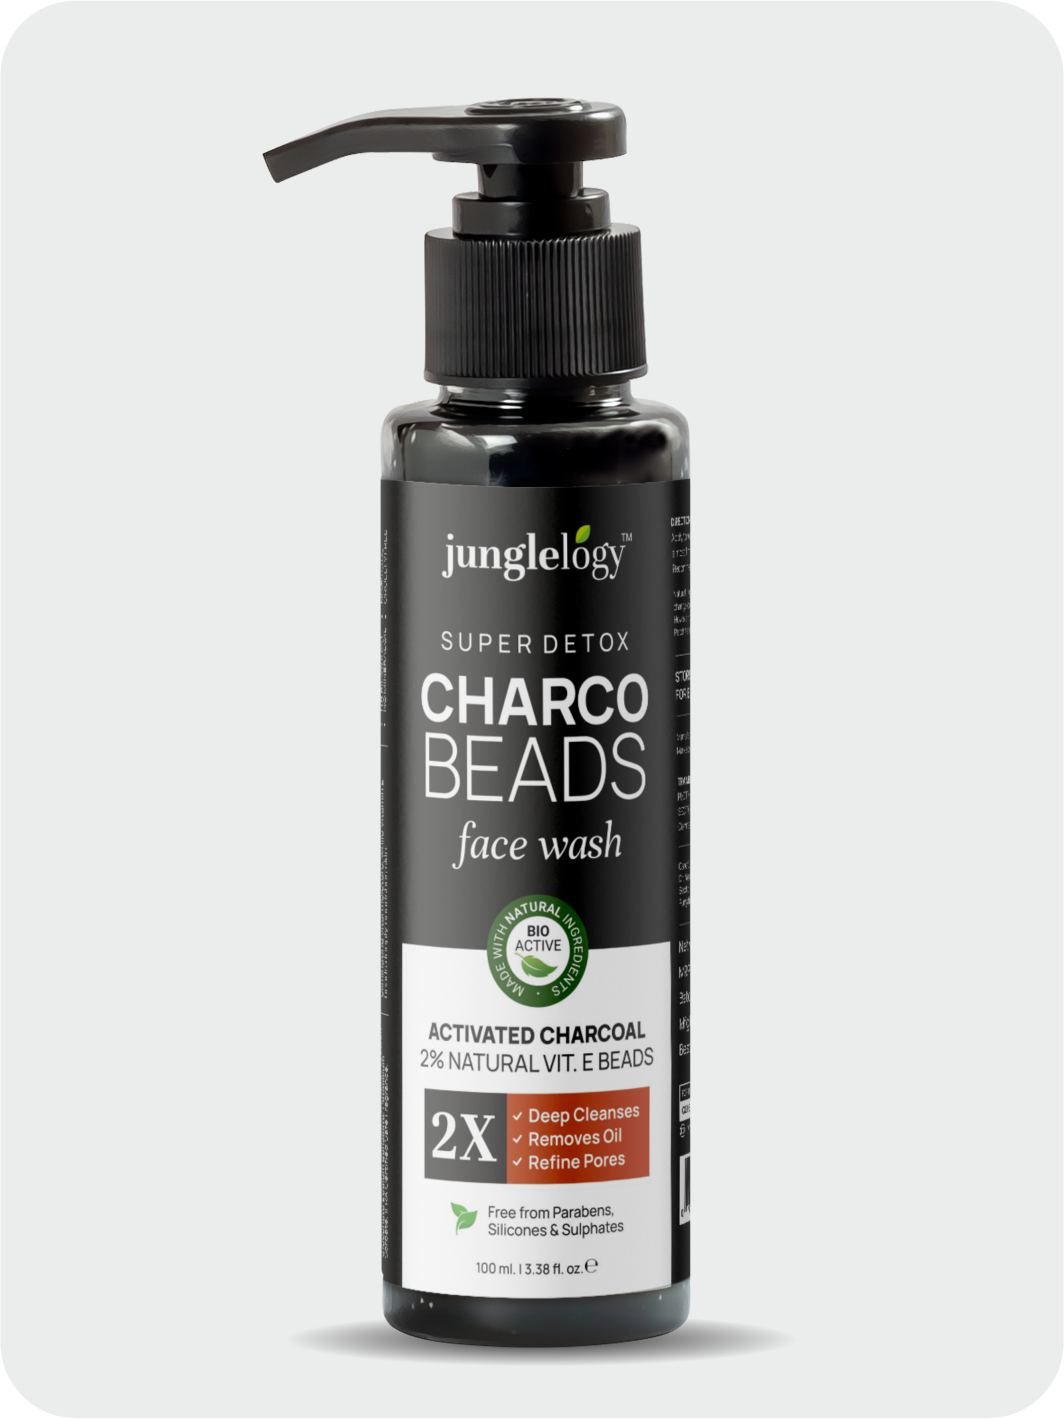 CharcoBeads Detox Face Wash